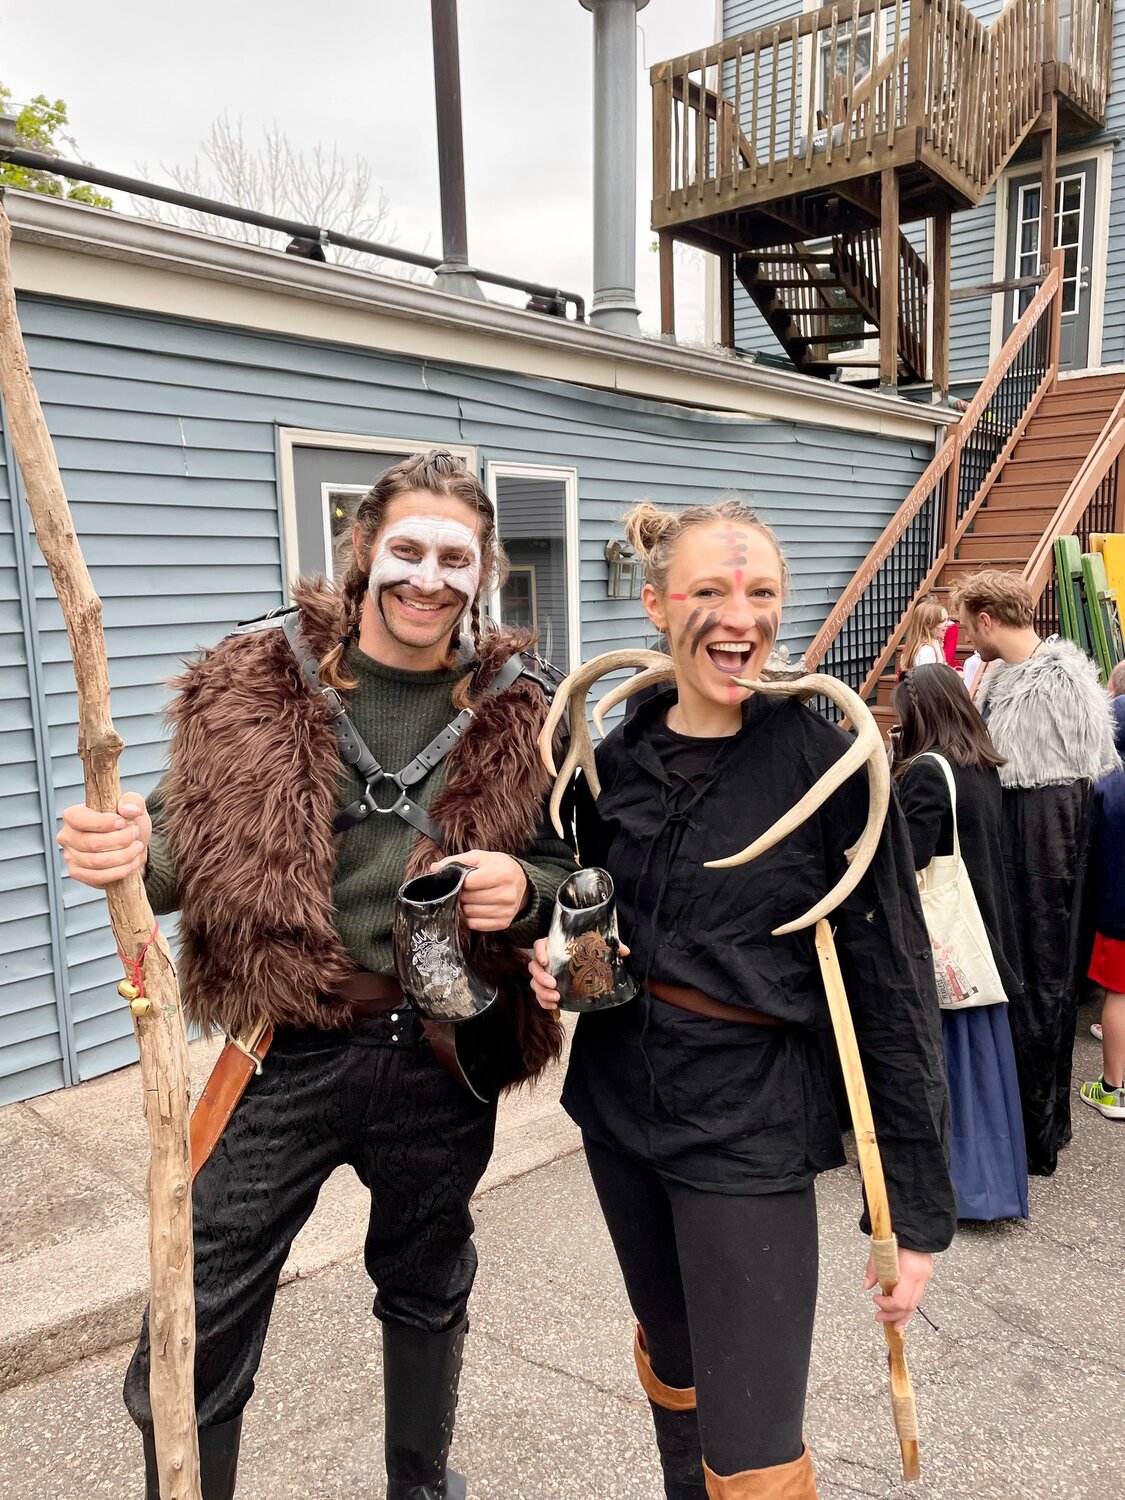 Anthony and Clare were in the Viking spirit.